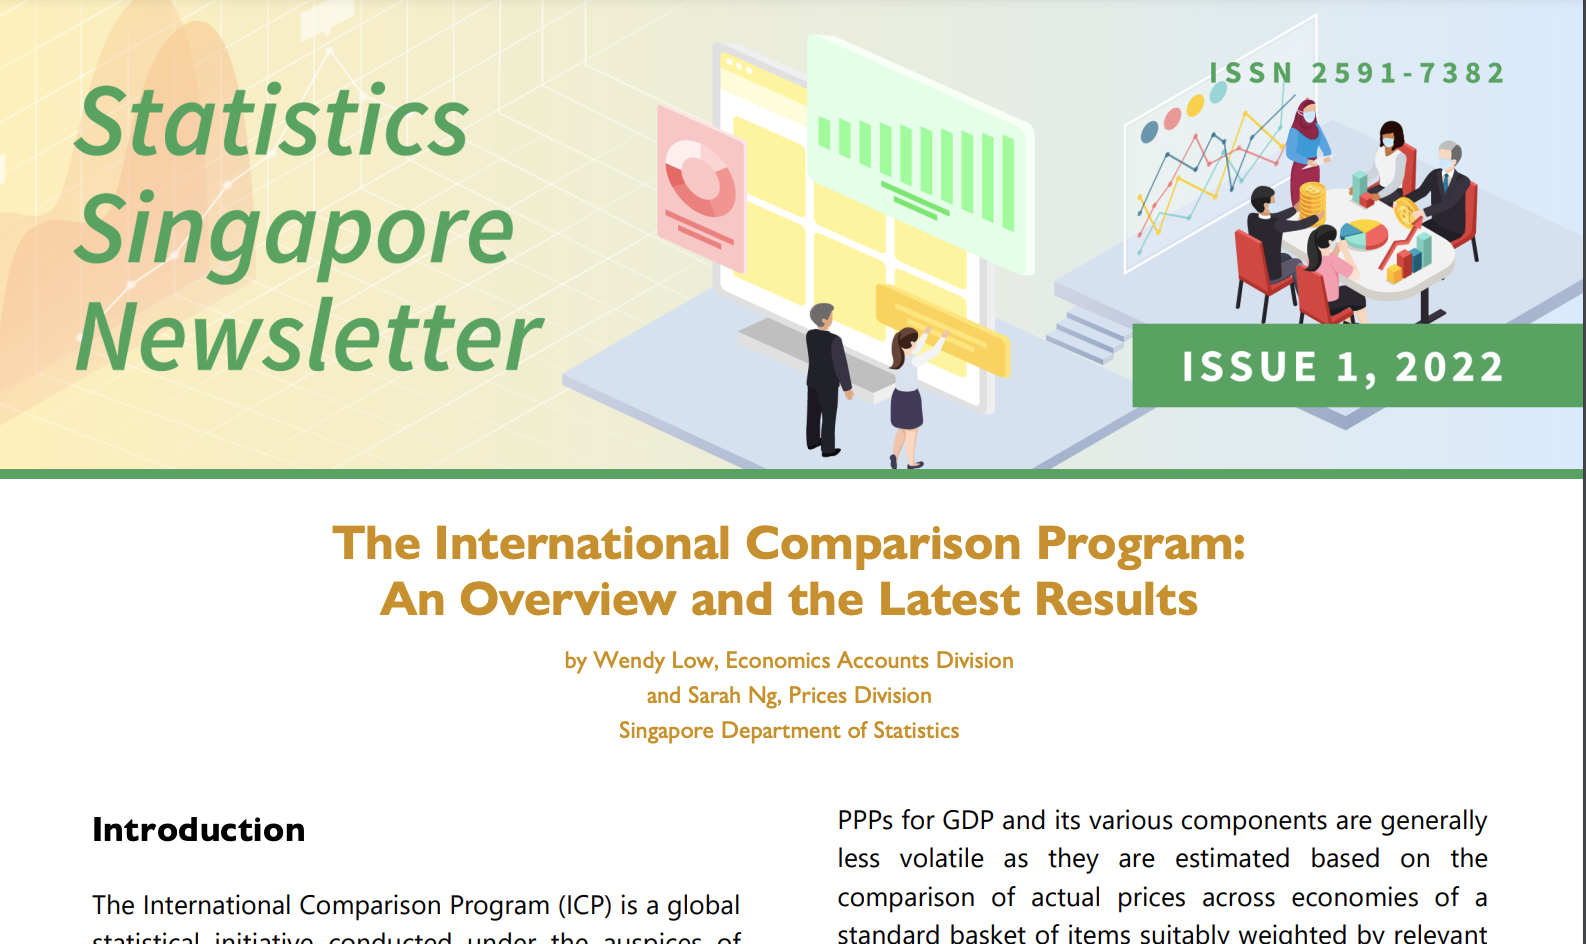 The International Comparison Program: An Overview and the Latest Results